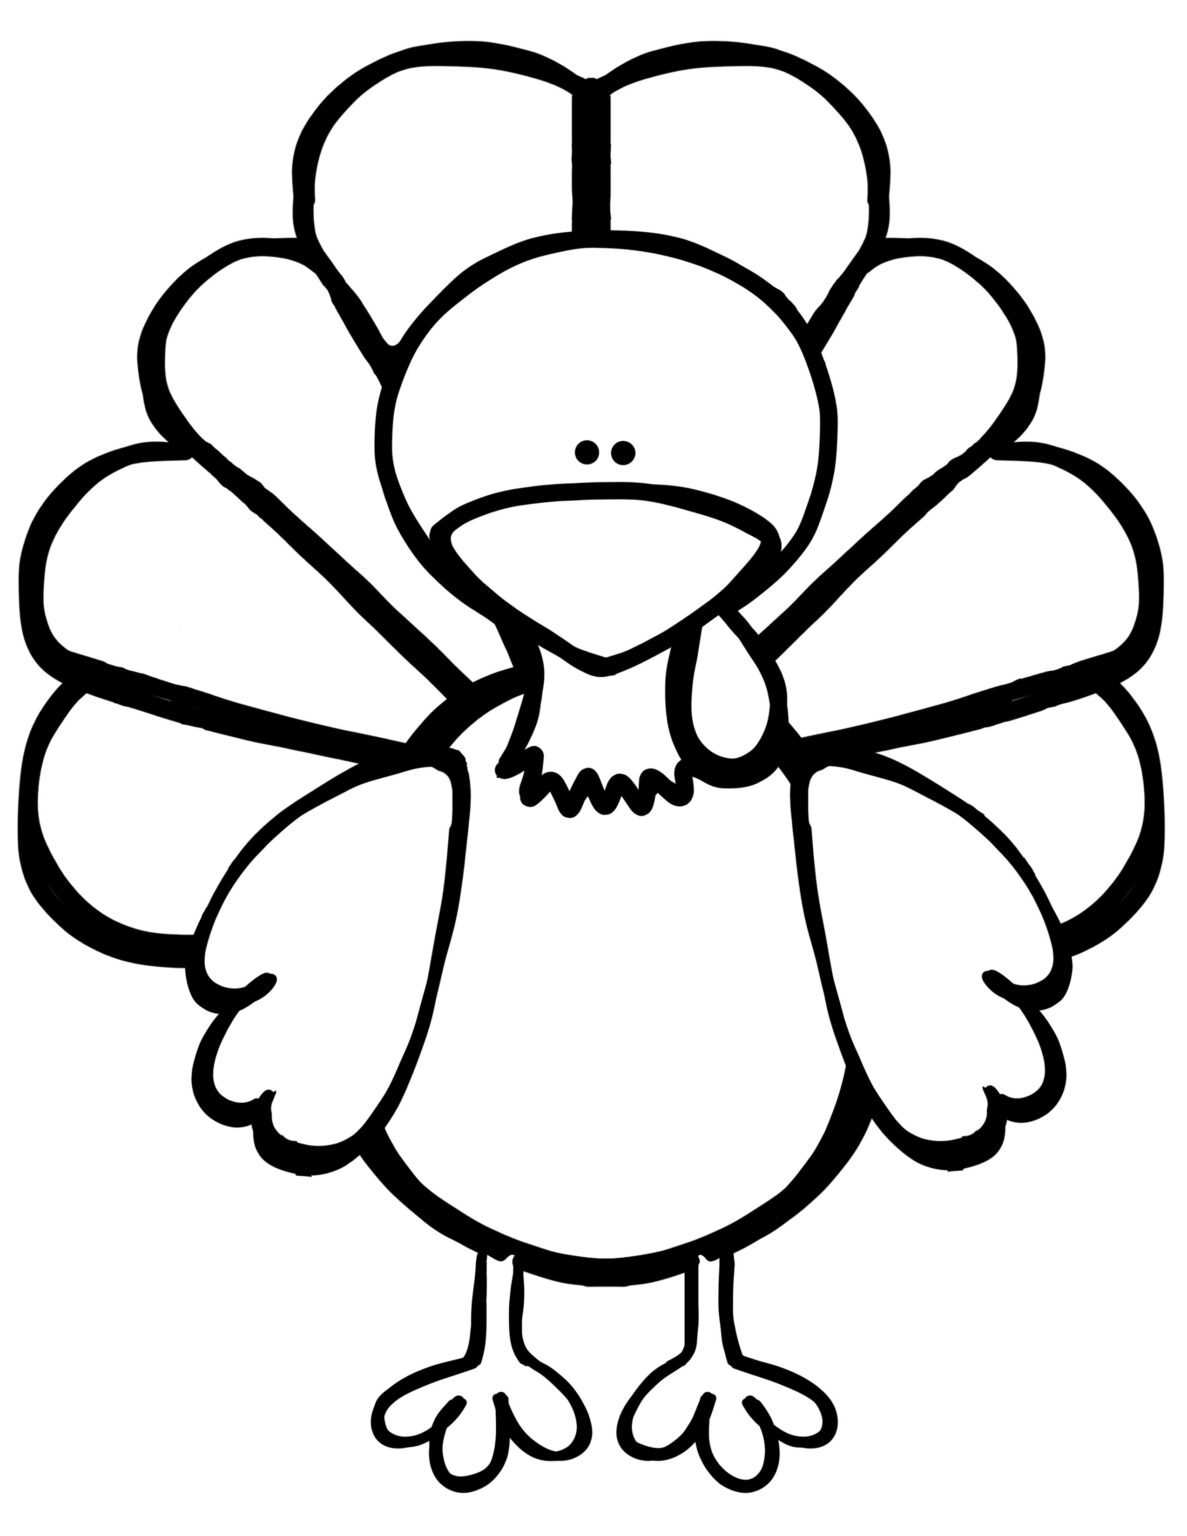 Disguise A Turkey Template Printable